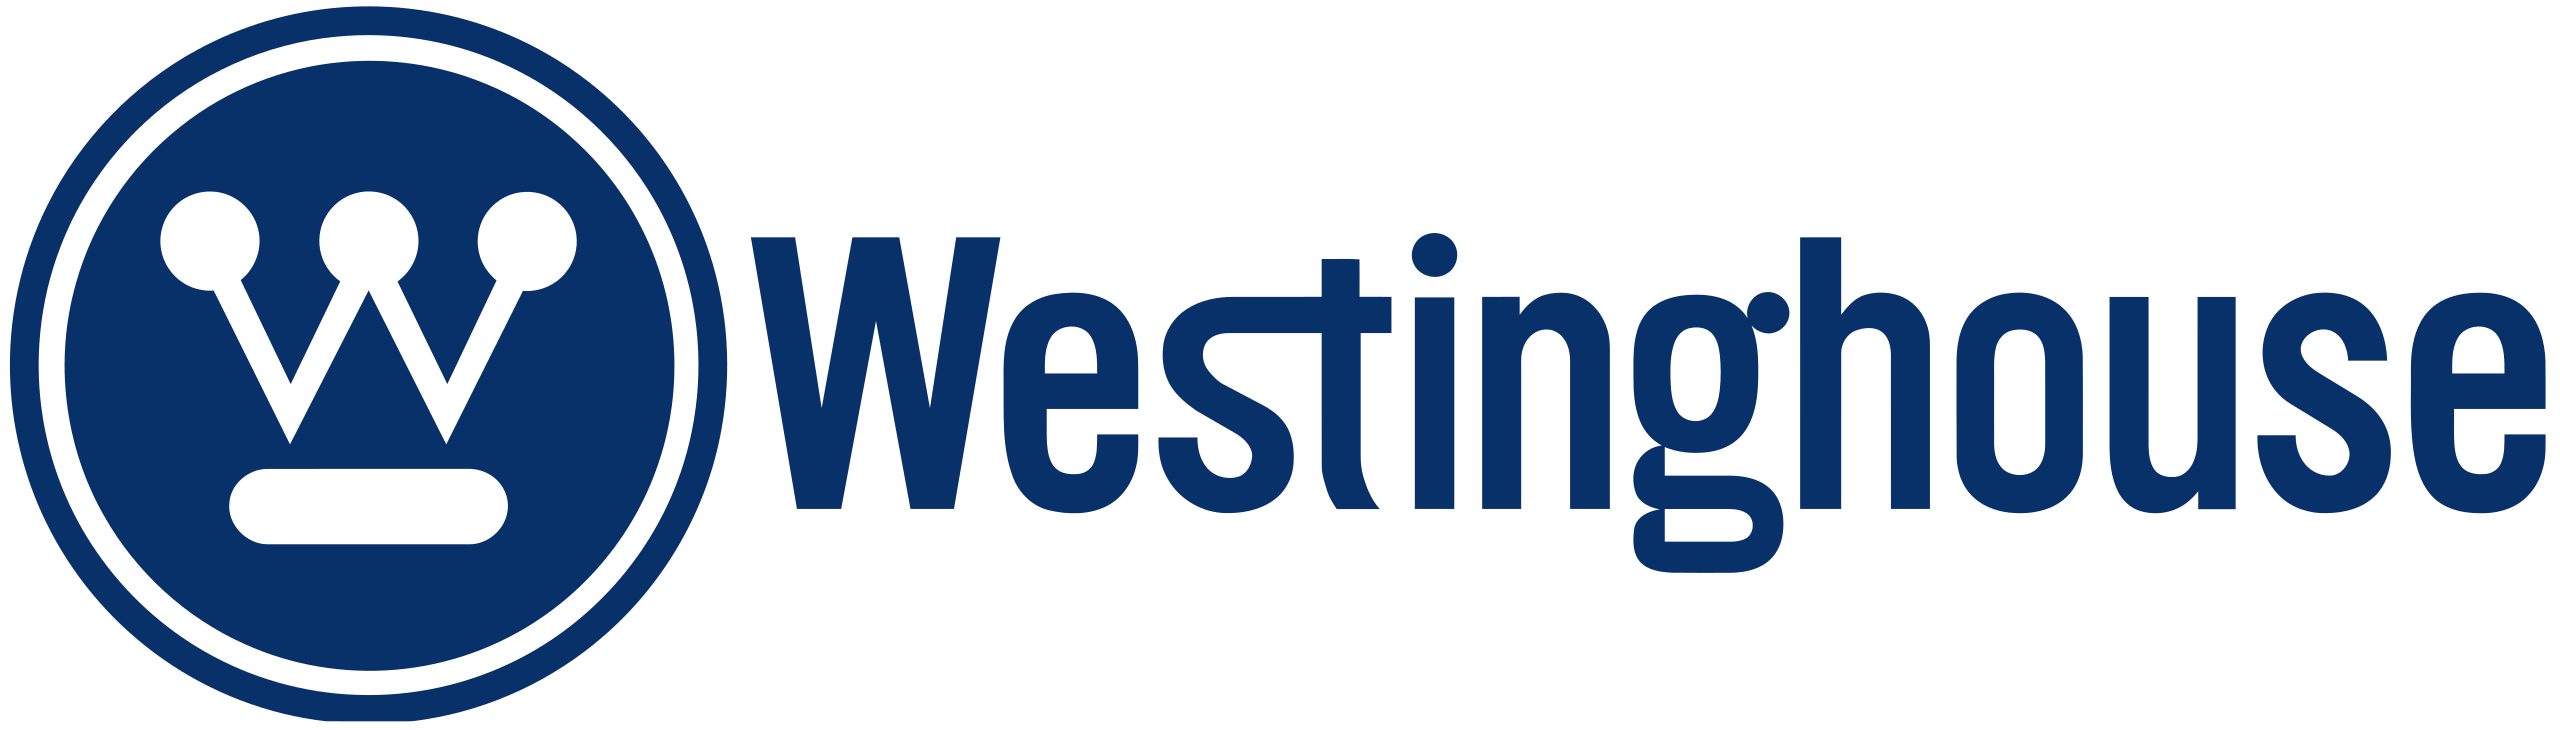 2560px-westinghouse_logo_and_wordmark.svg.png